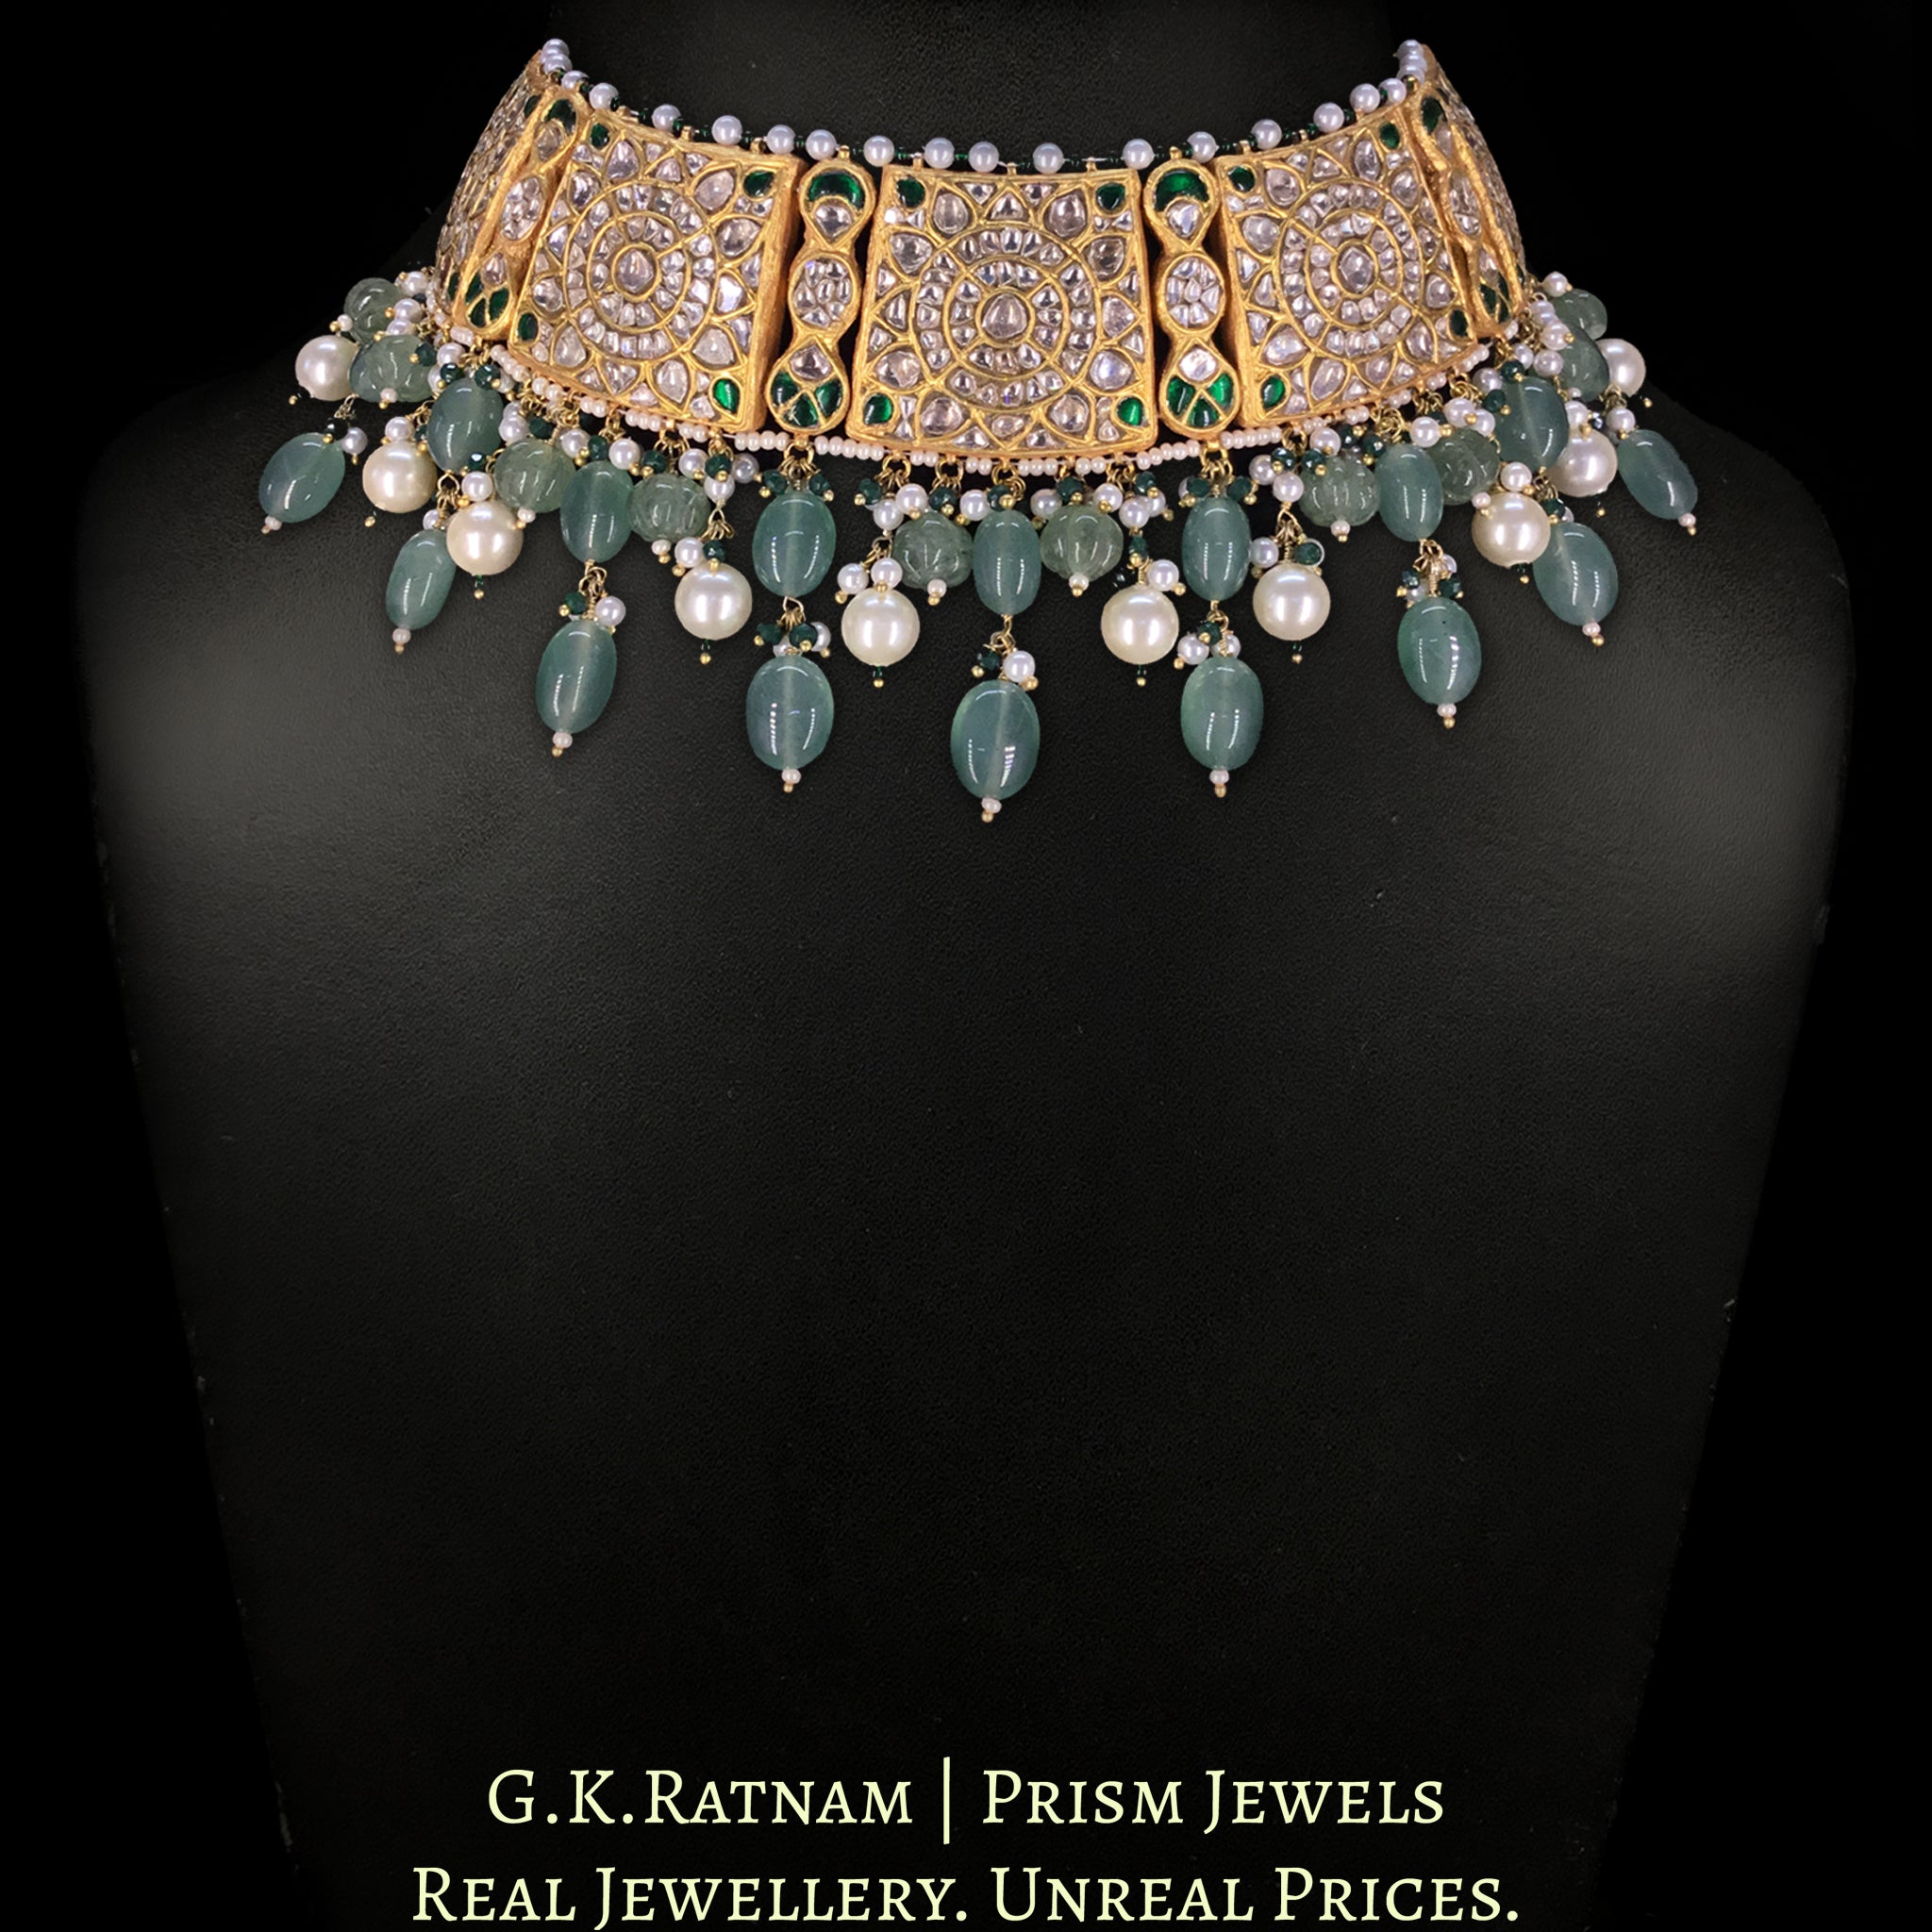 23k Gold and Diamond Polki Choker Necklace Set enhanced with Green Strawberry Quartz and Pearls